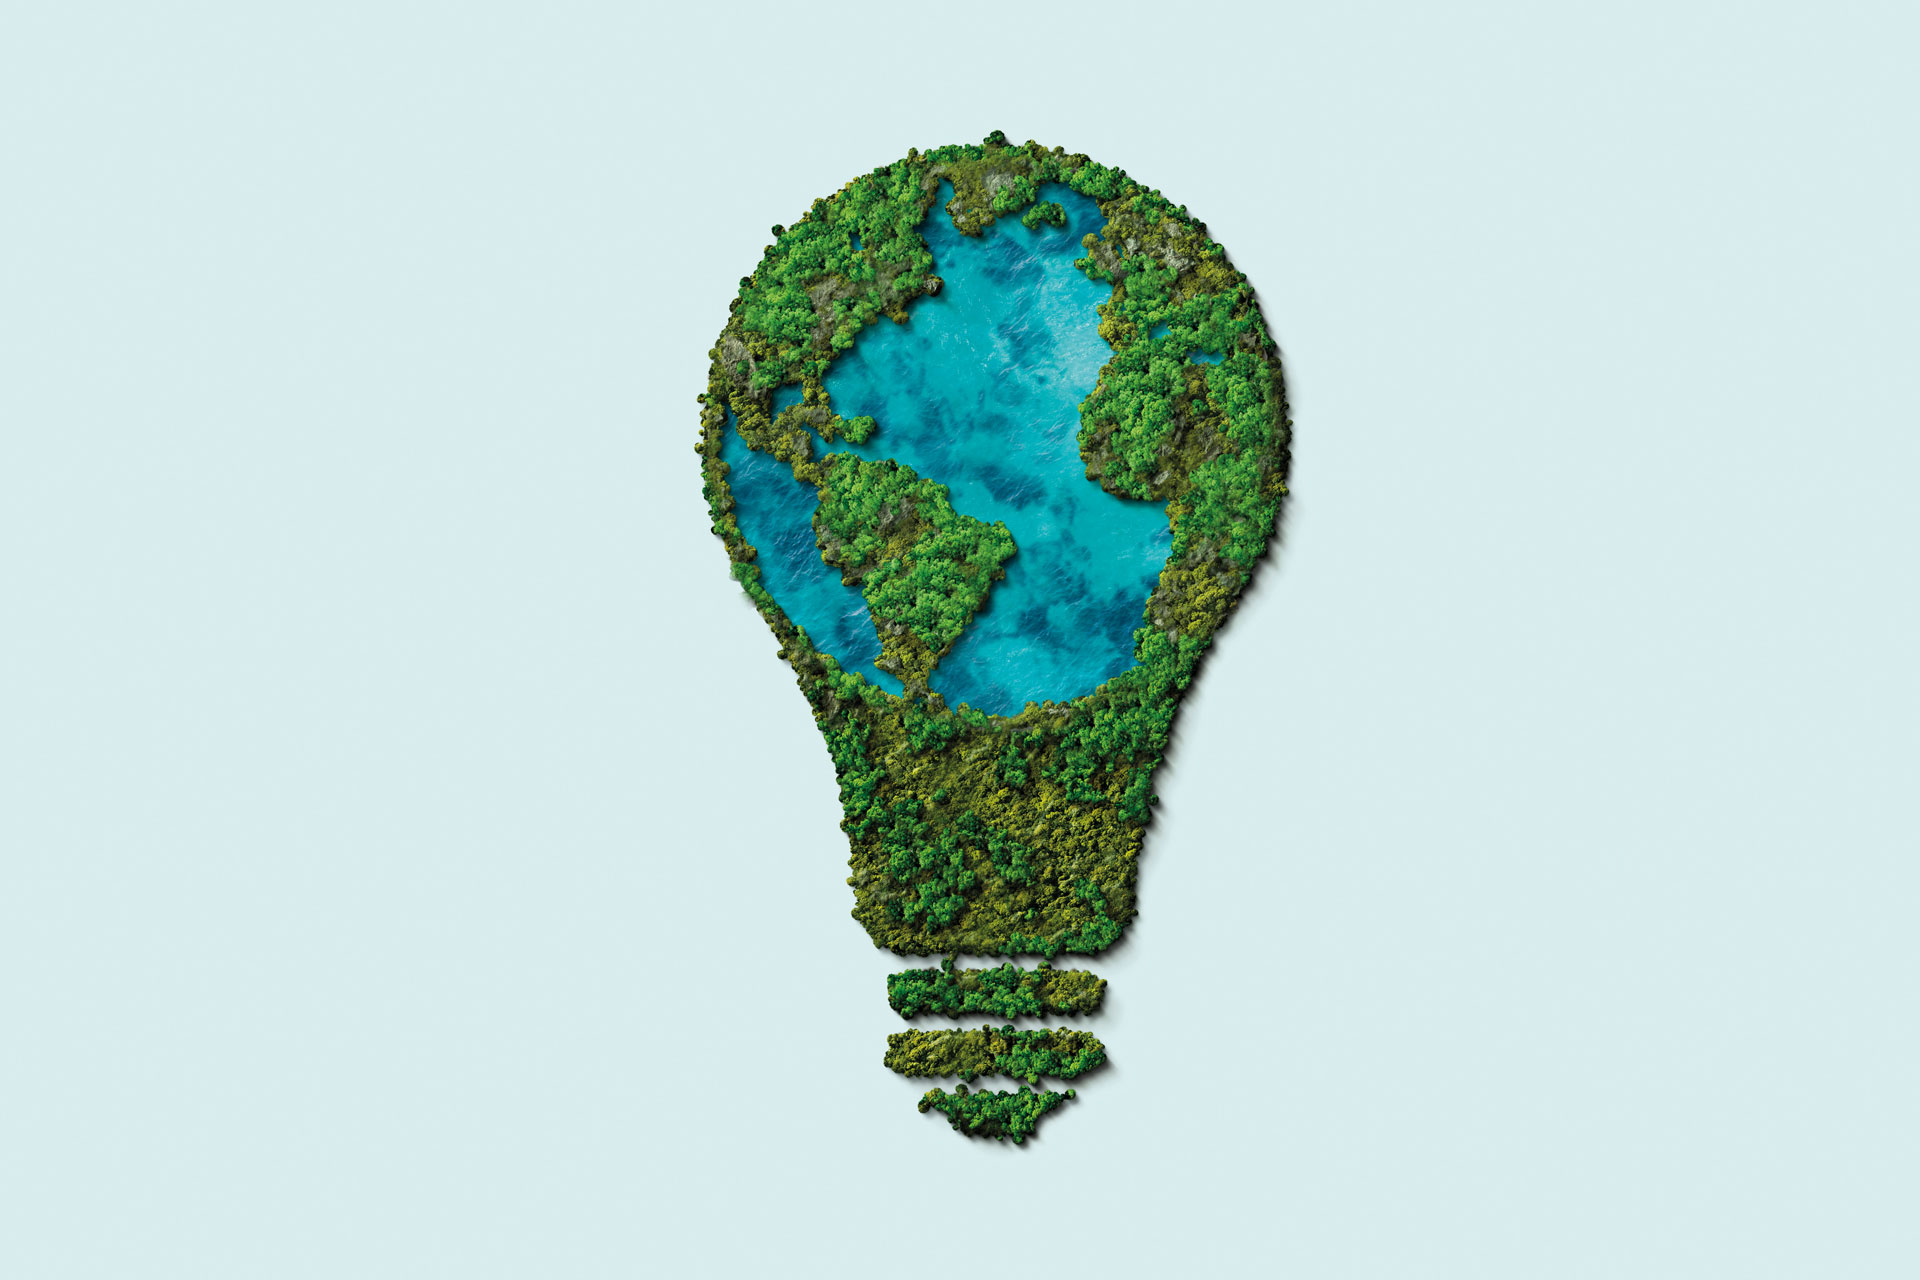 Ideas to save the planet